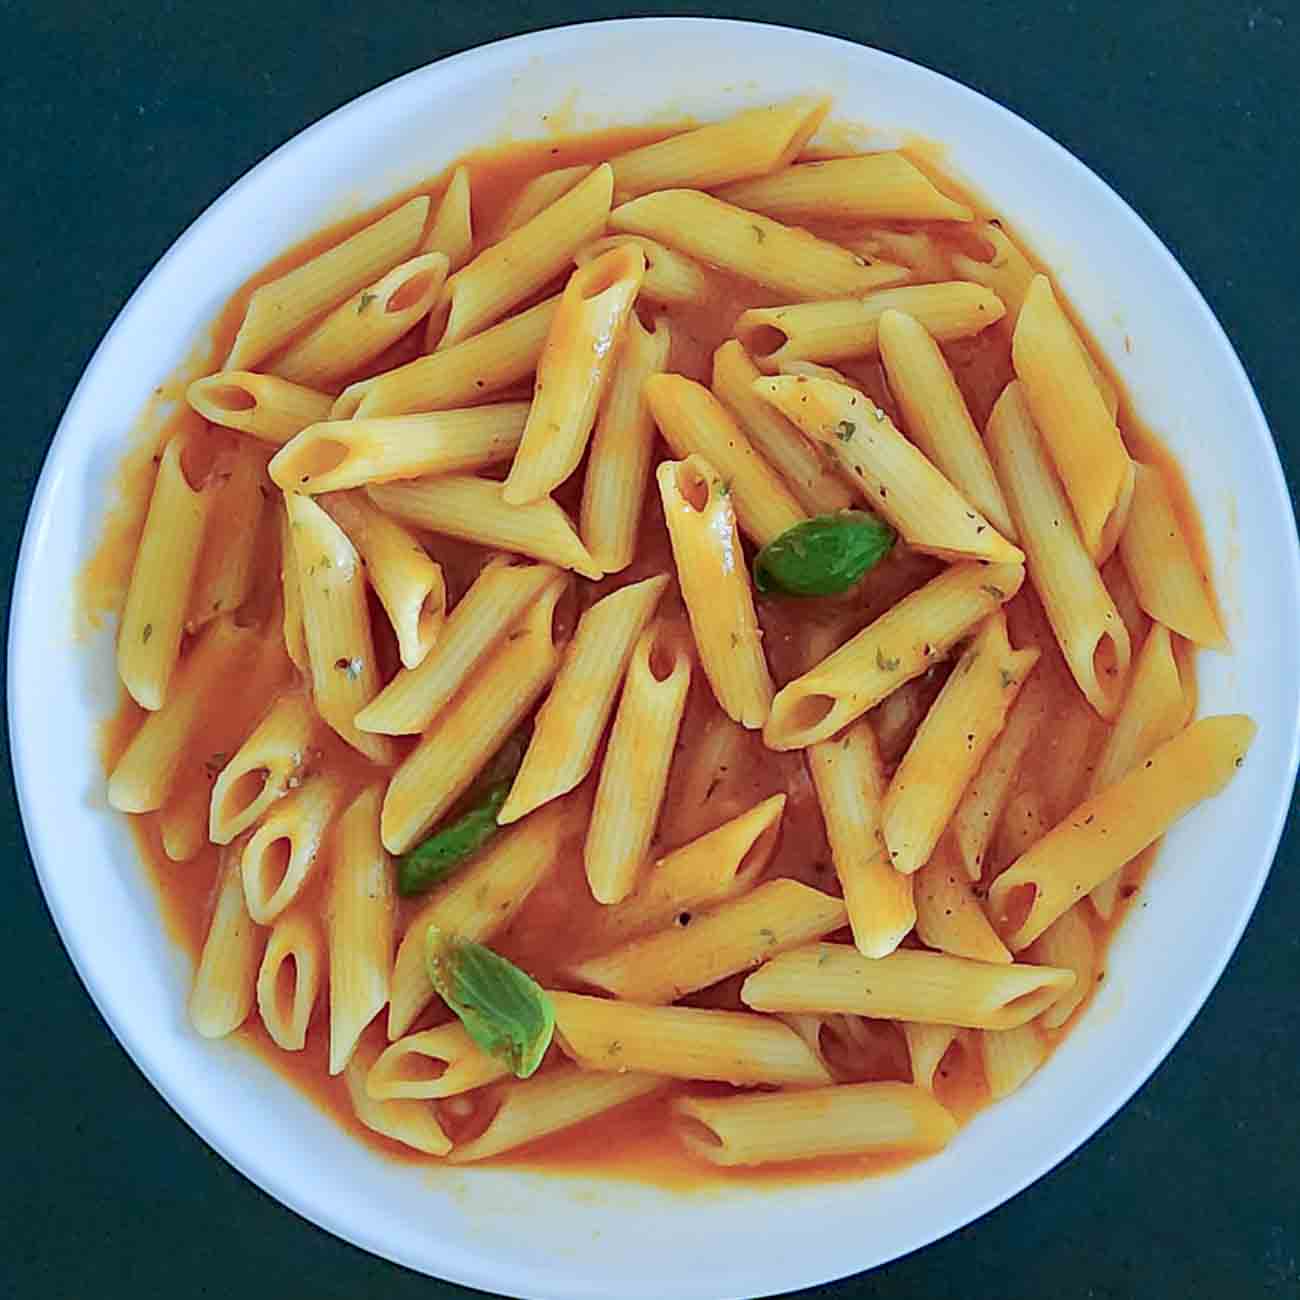 6-ingredient Pasta dinner with creamy roasted red pepper sauce.